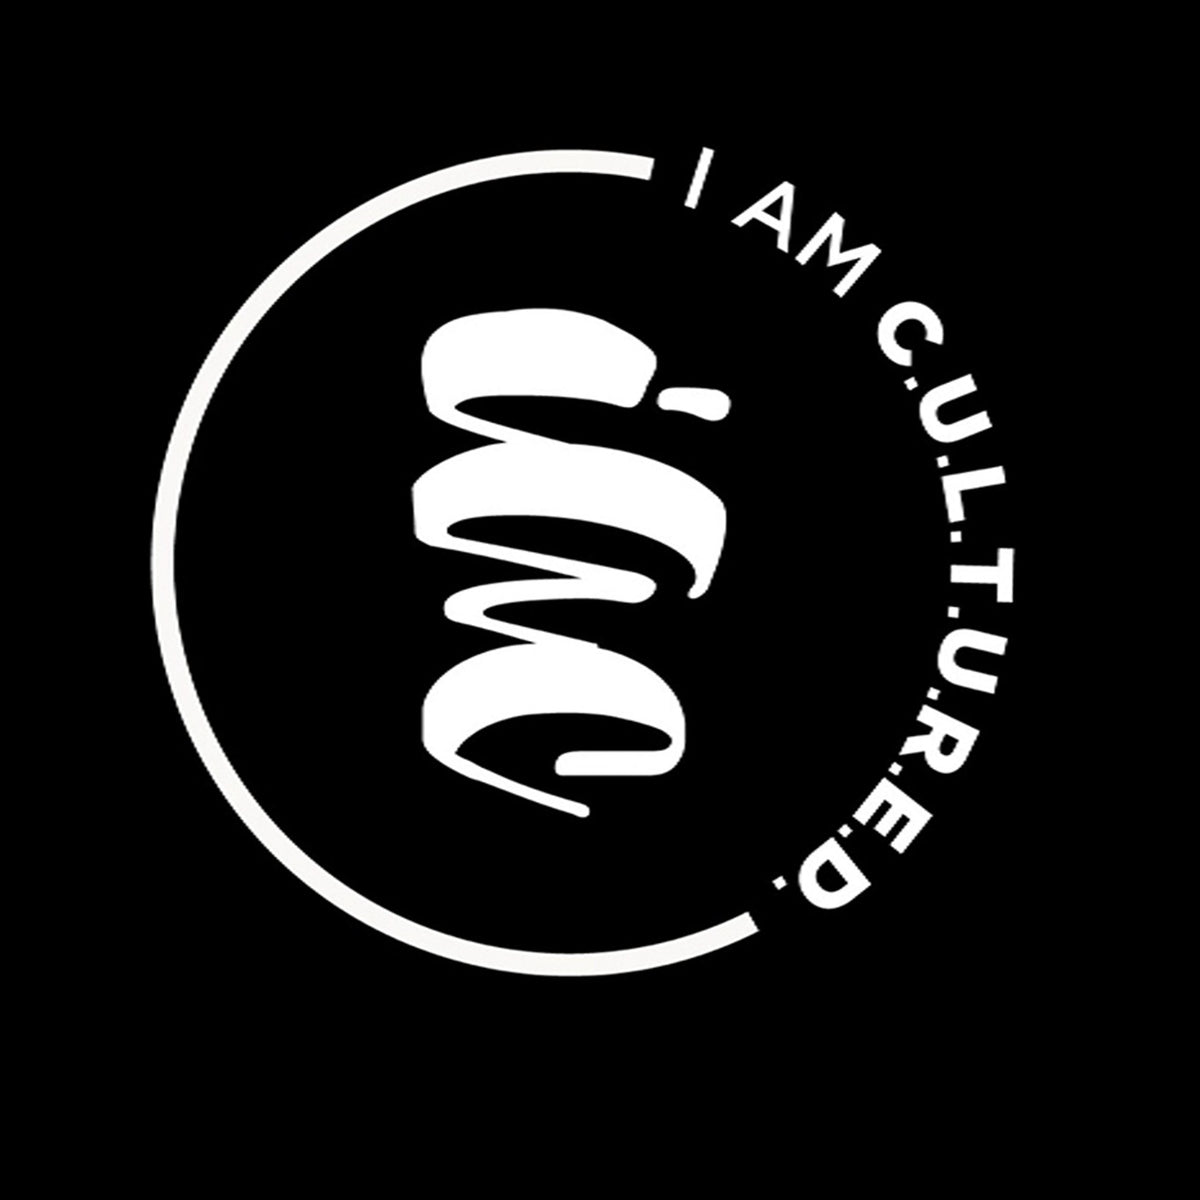 I AM CULTURED - For The Culture Clothing Inc.